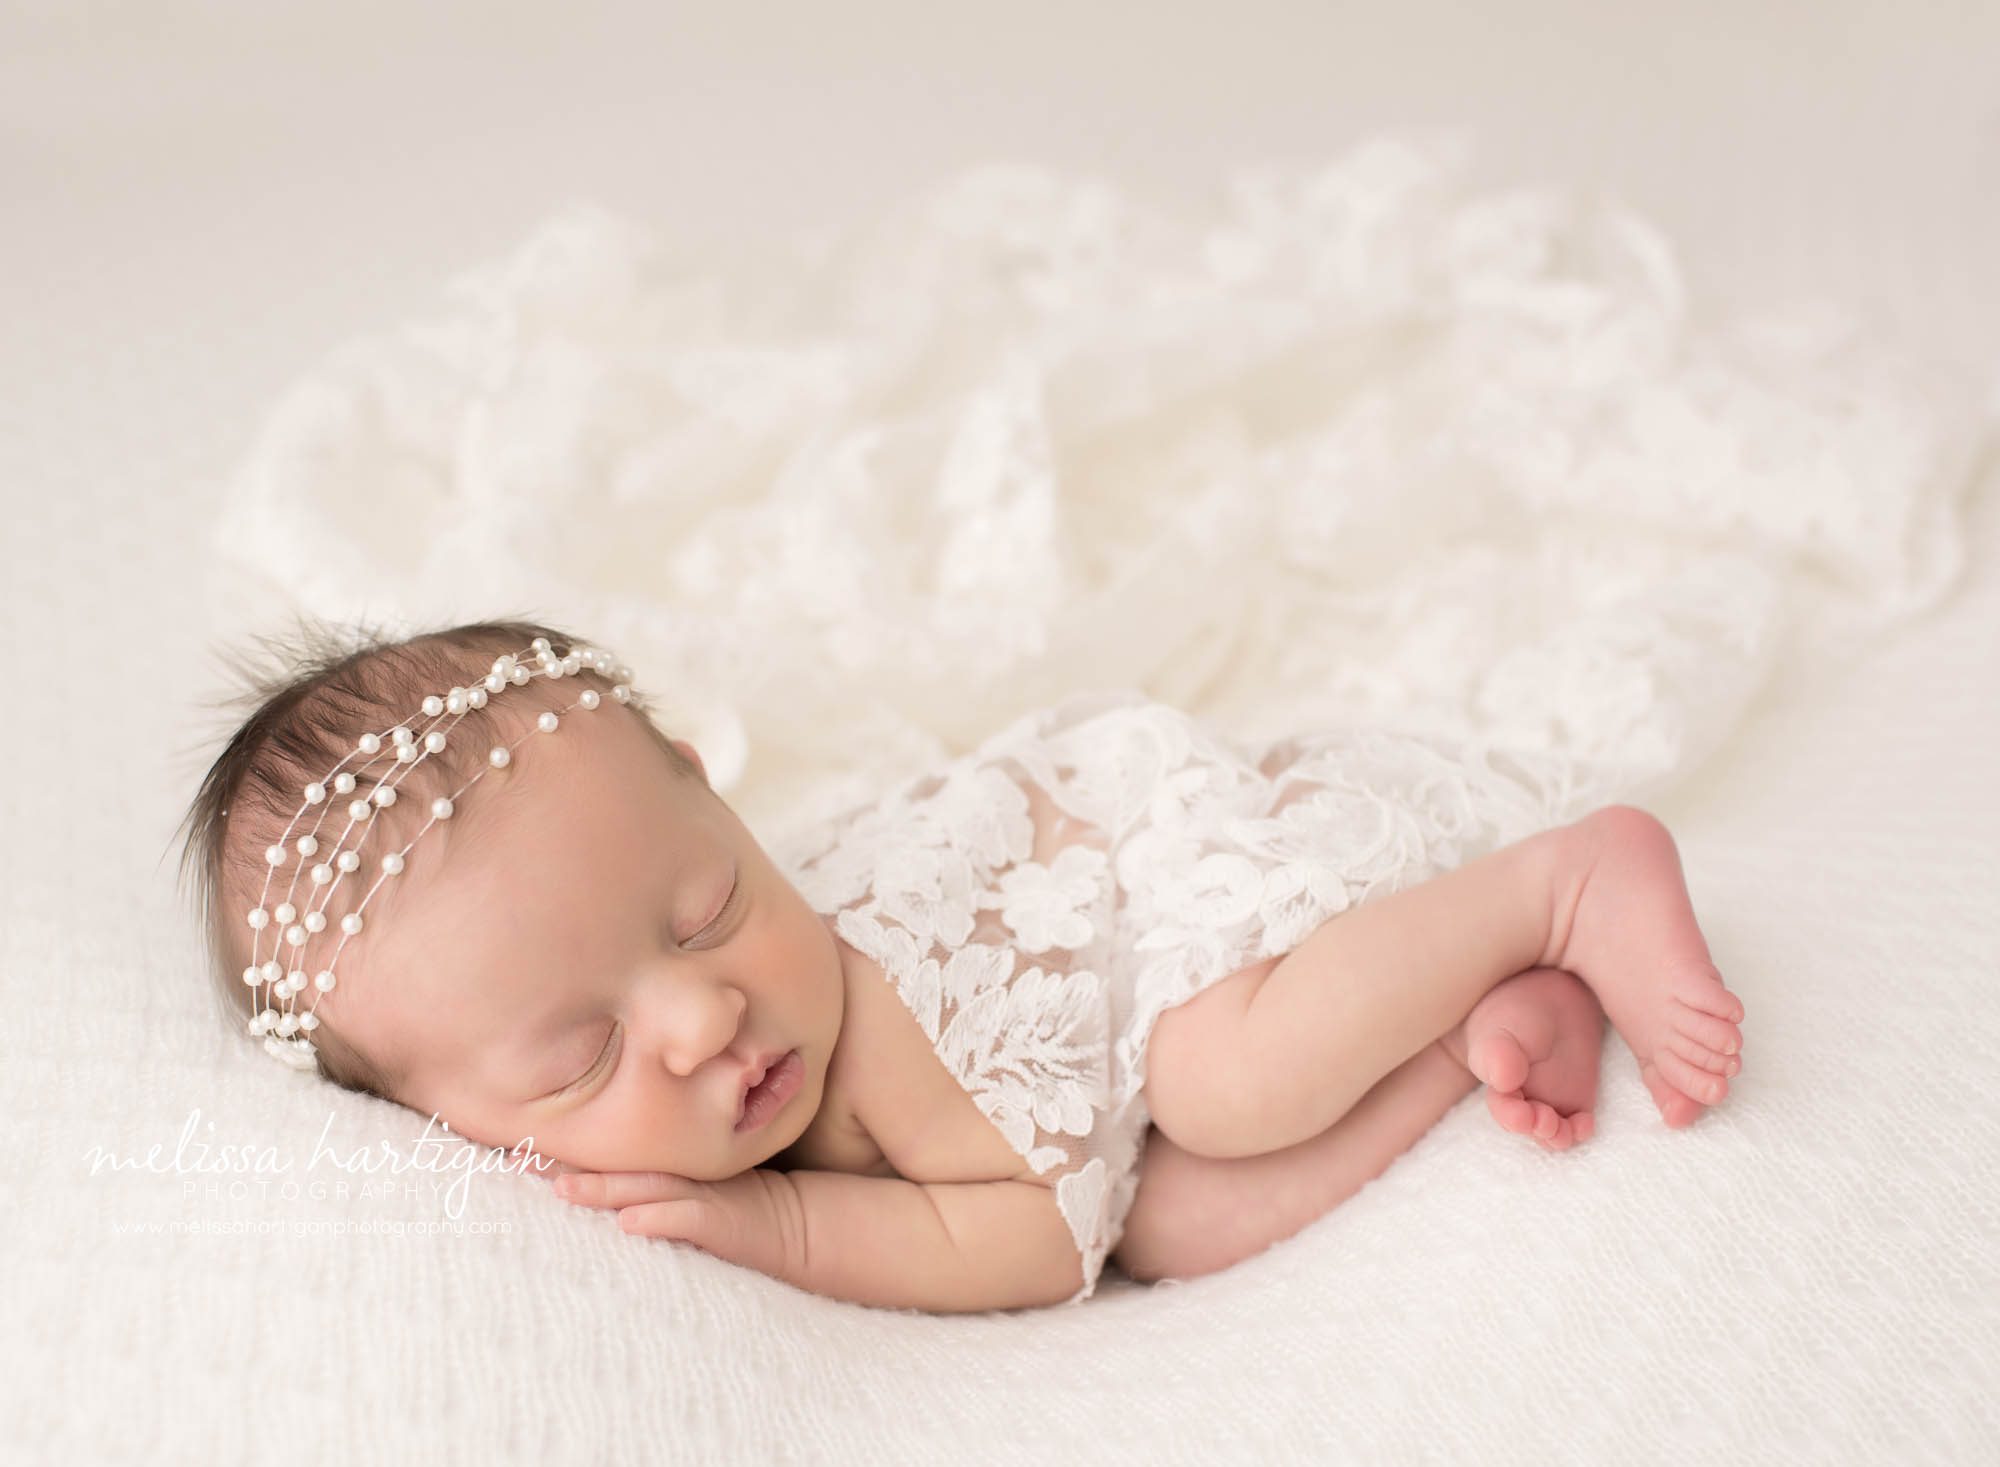 newborn baby girl posed on cream backdrop with white lace layer draped over her posed on side